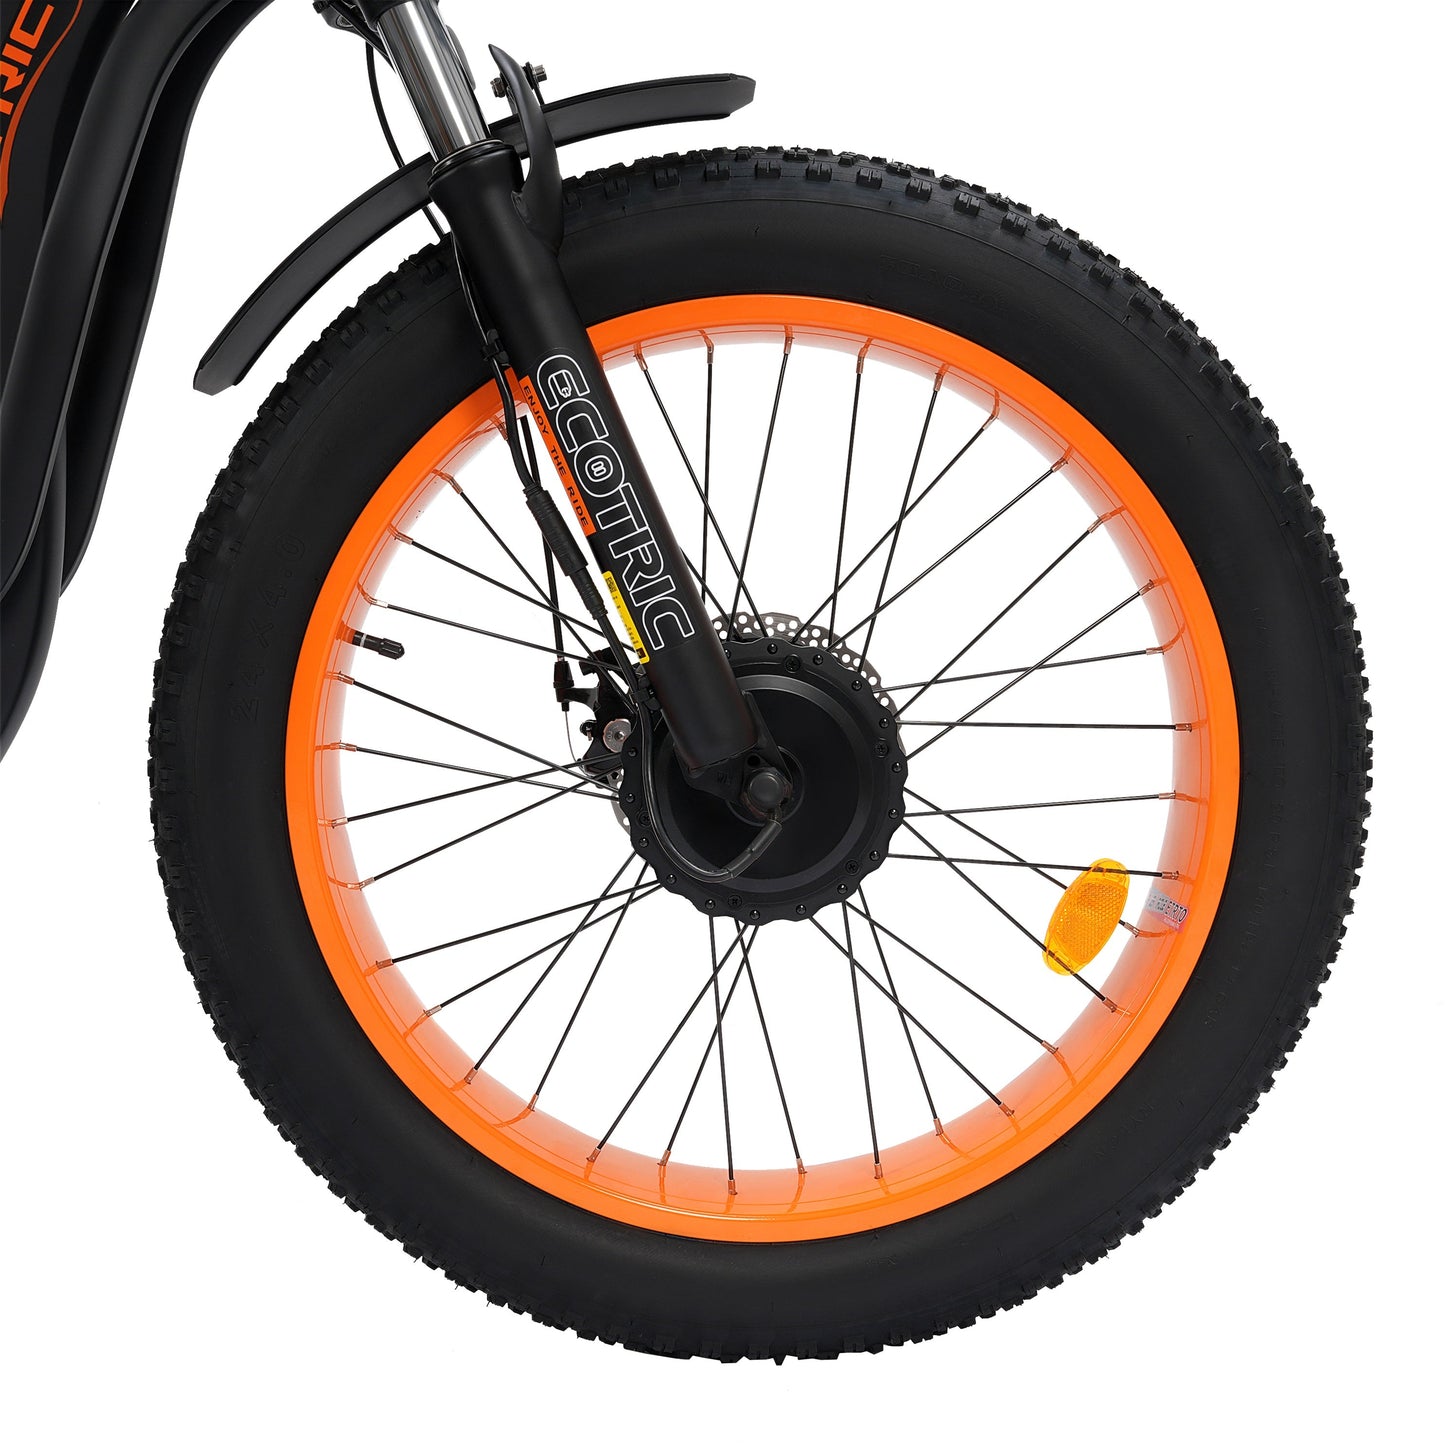 Ecotric 48V 24"x4.0 Front 20"x4.0 Rear Tires Tricycle electric bike with Front Basket + Rear Rack-senior